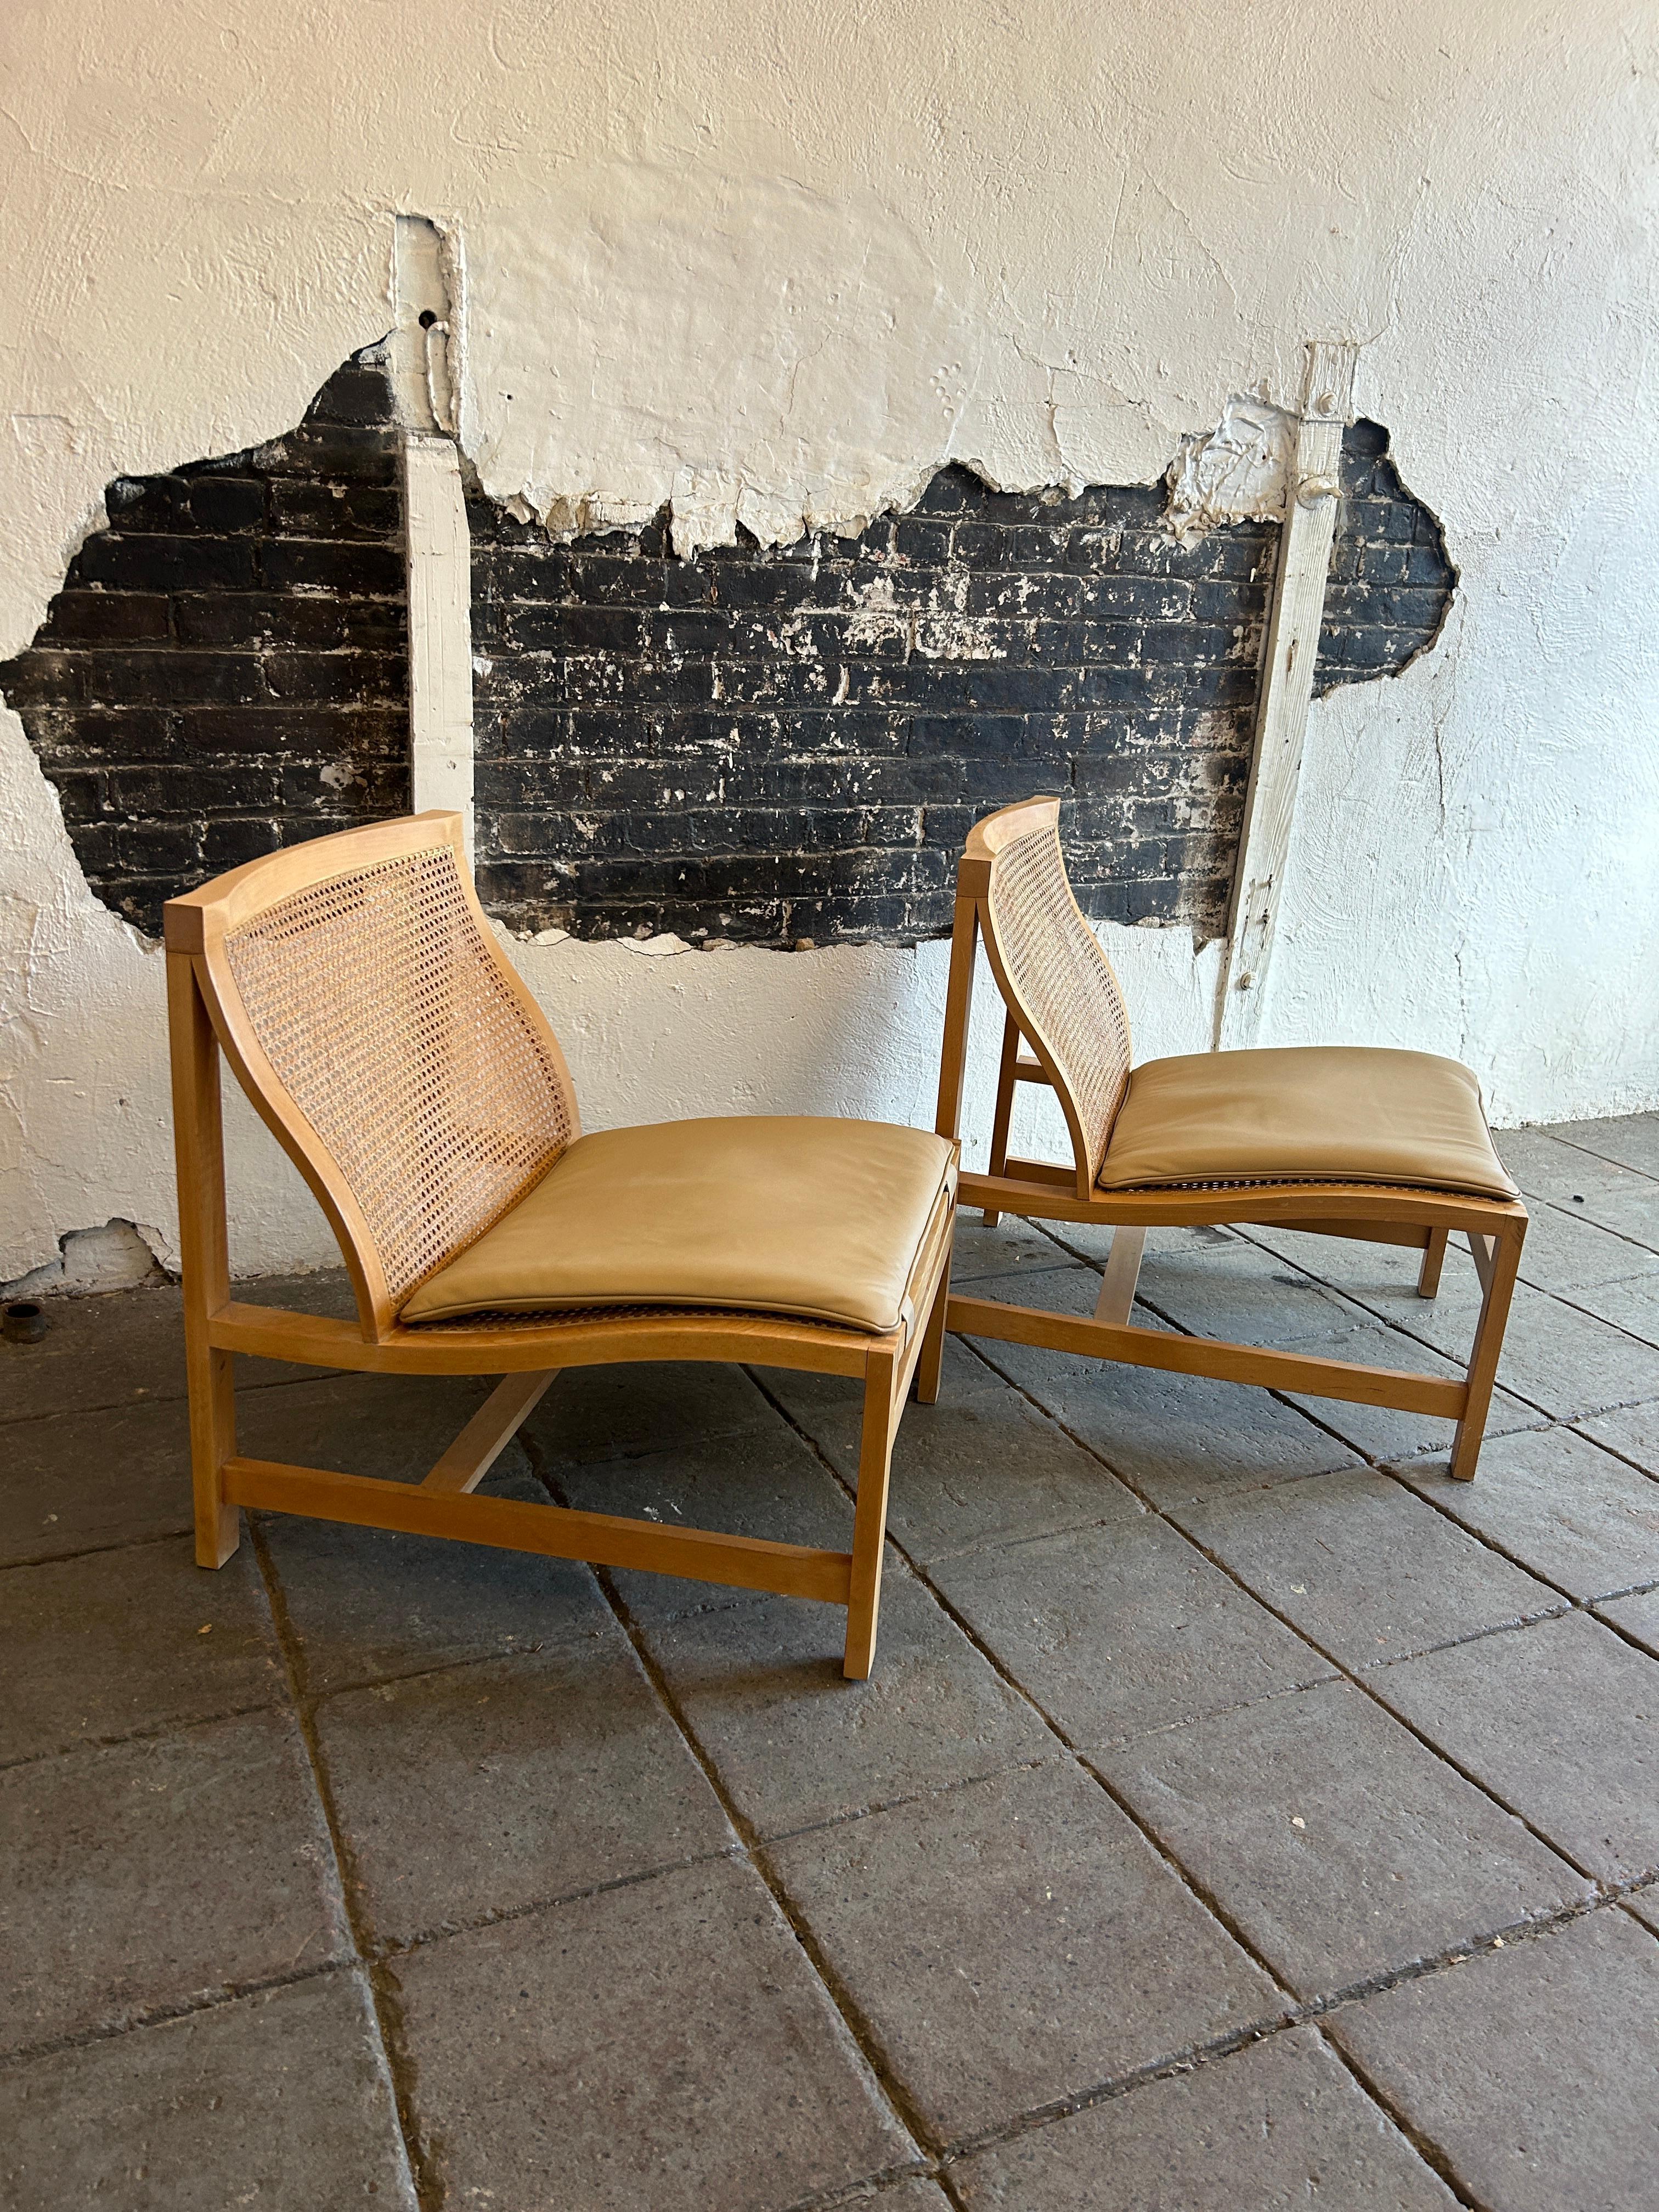 Scandinavian modern Cane Birch Leather lounge chairs. Beautiful design solid birch with cane seat and seat back. Has tan leather removable seat cushion. All cane is in excellent condition very sturdy well built chairs. Designed by Rud Thygesen and